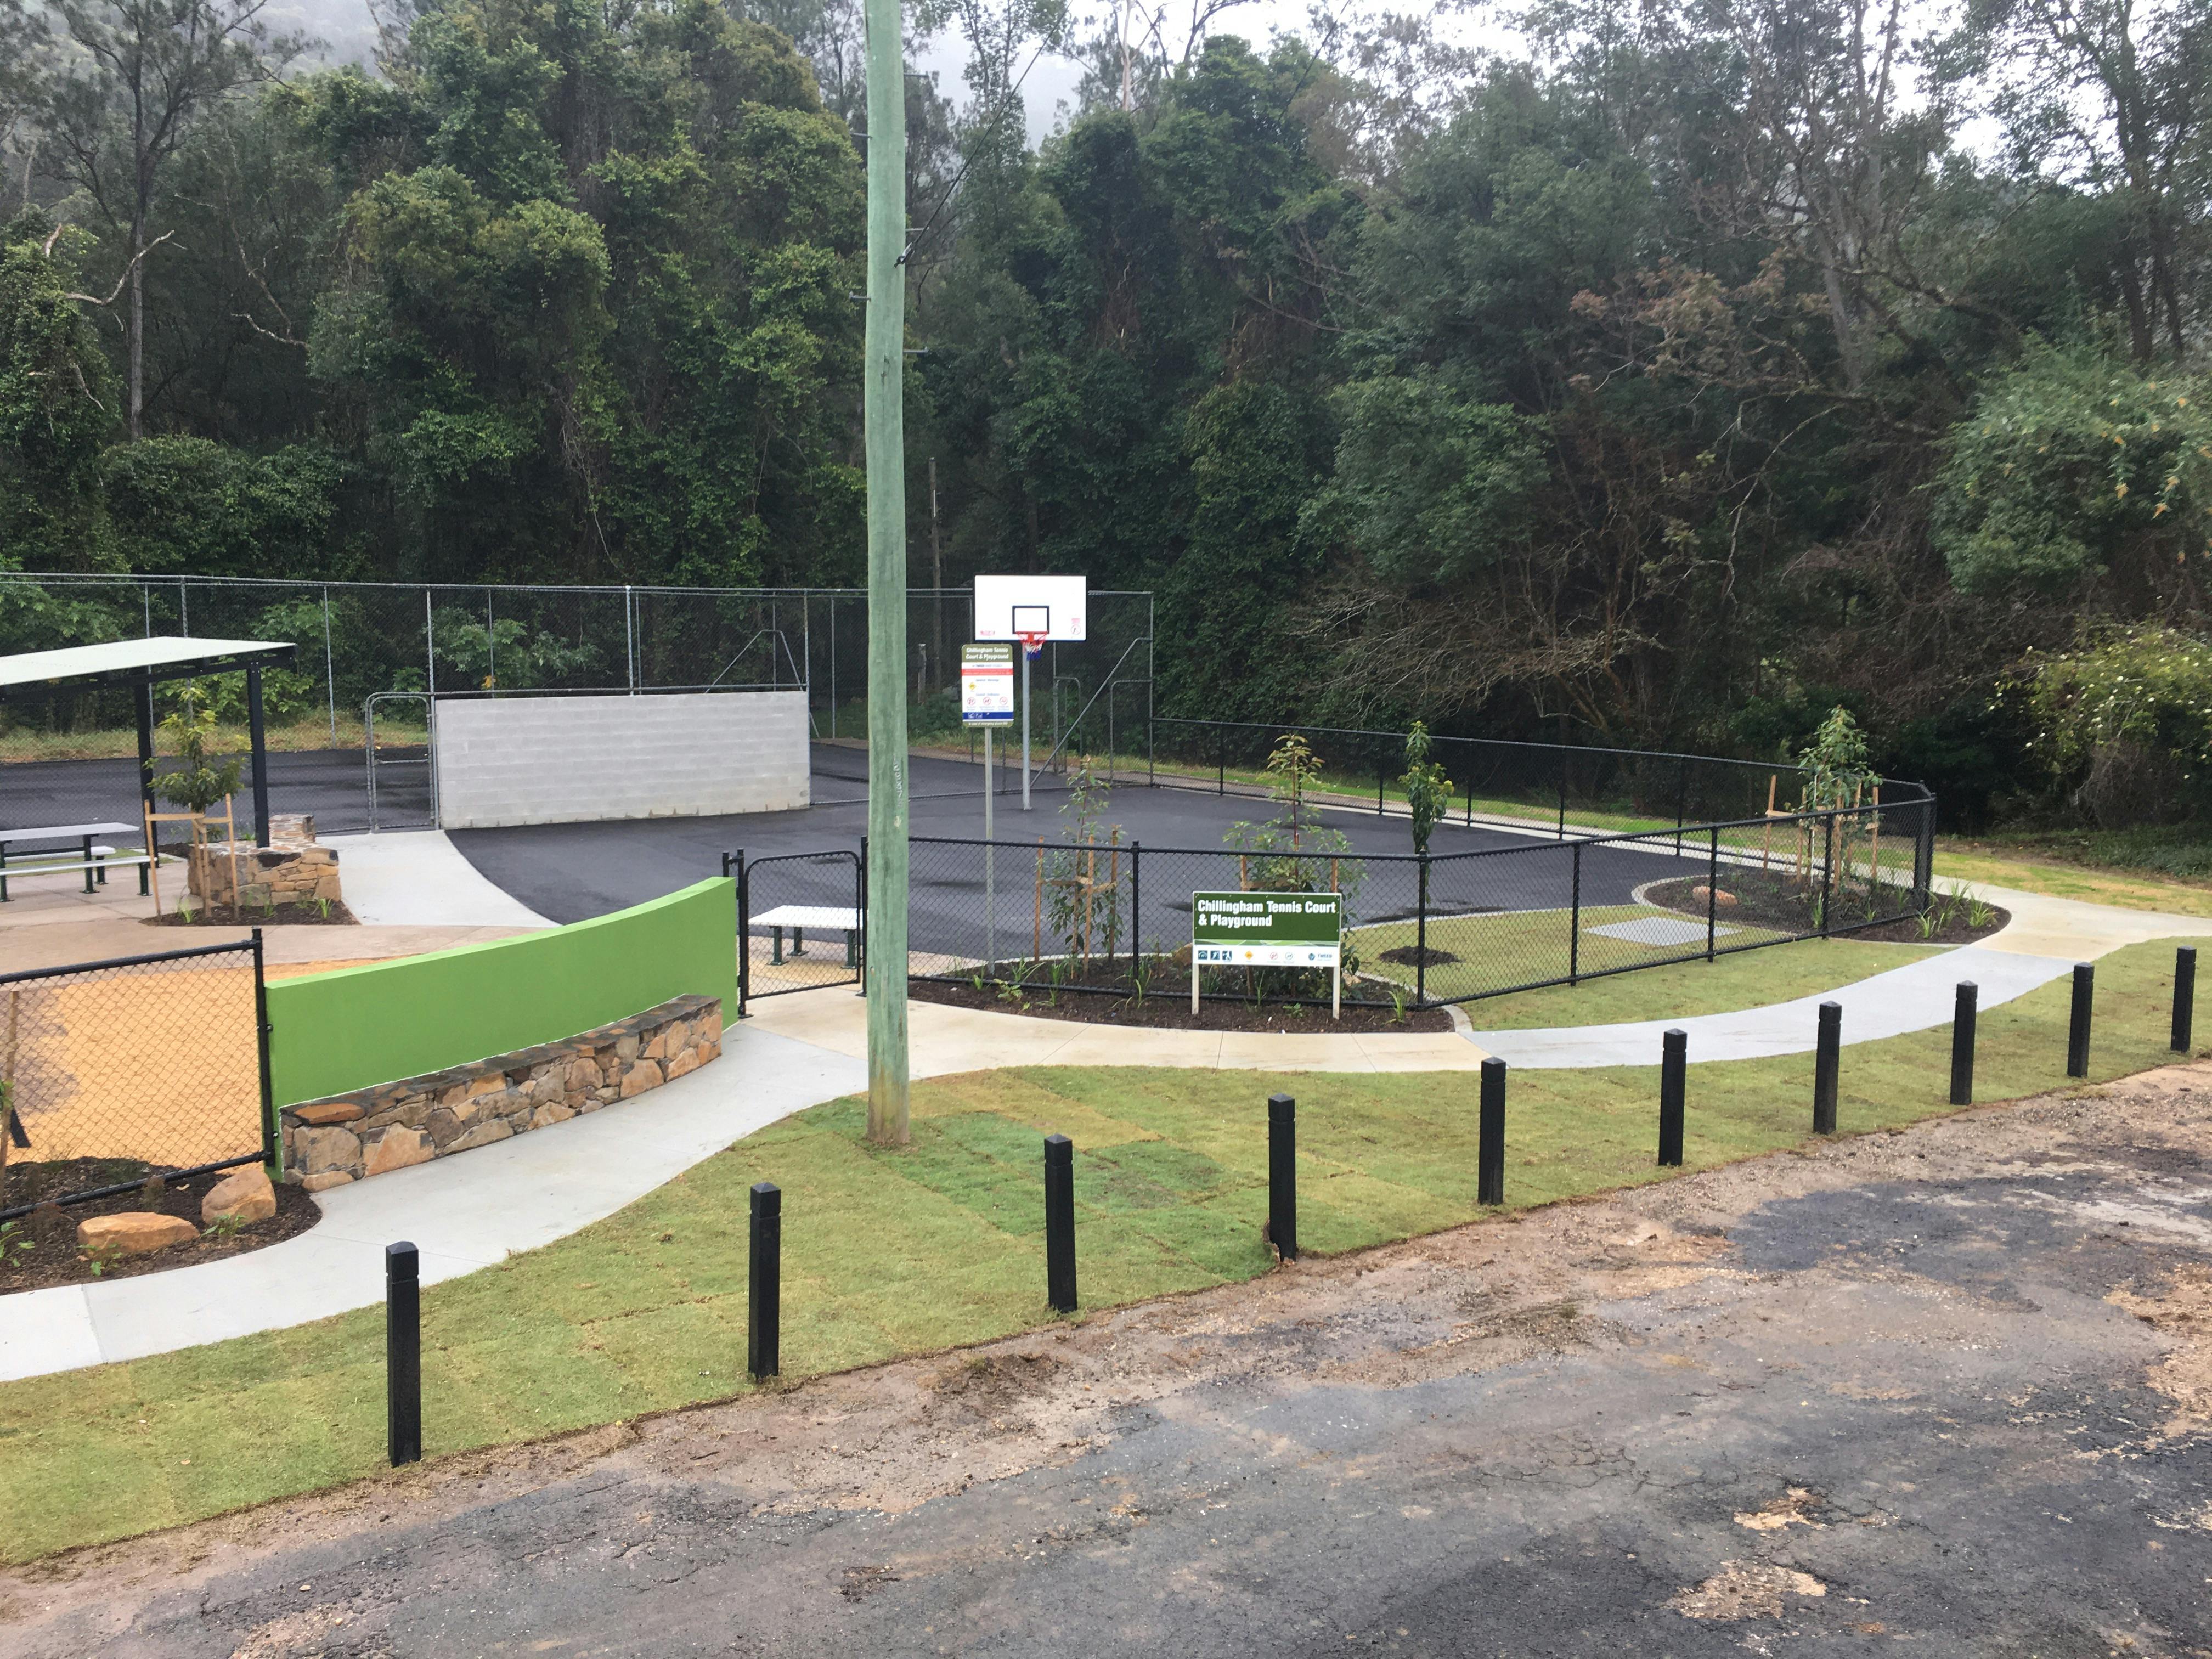 Chillingham Tennis courts and playground - completed project